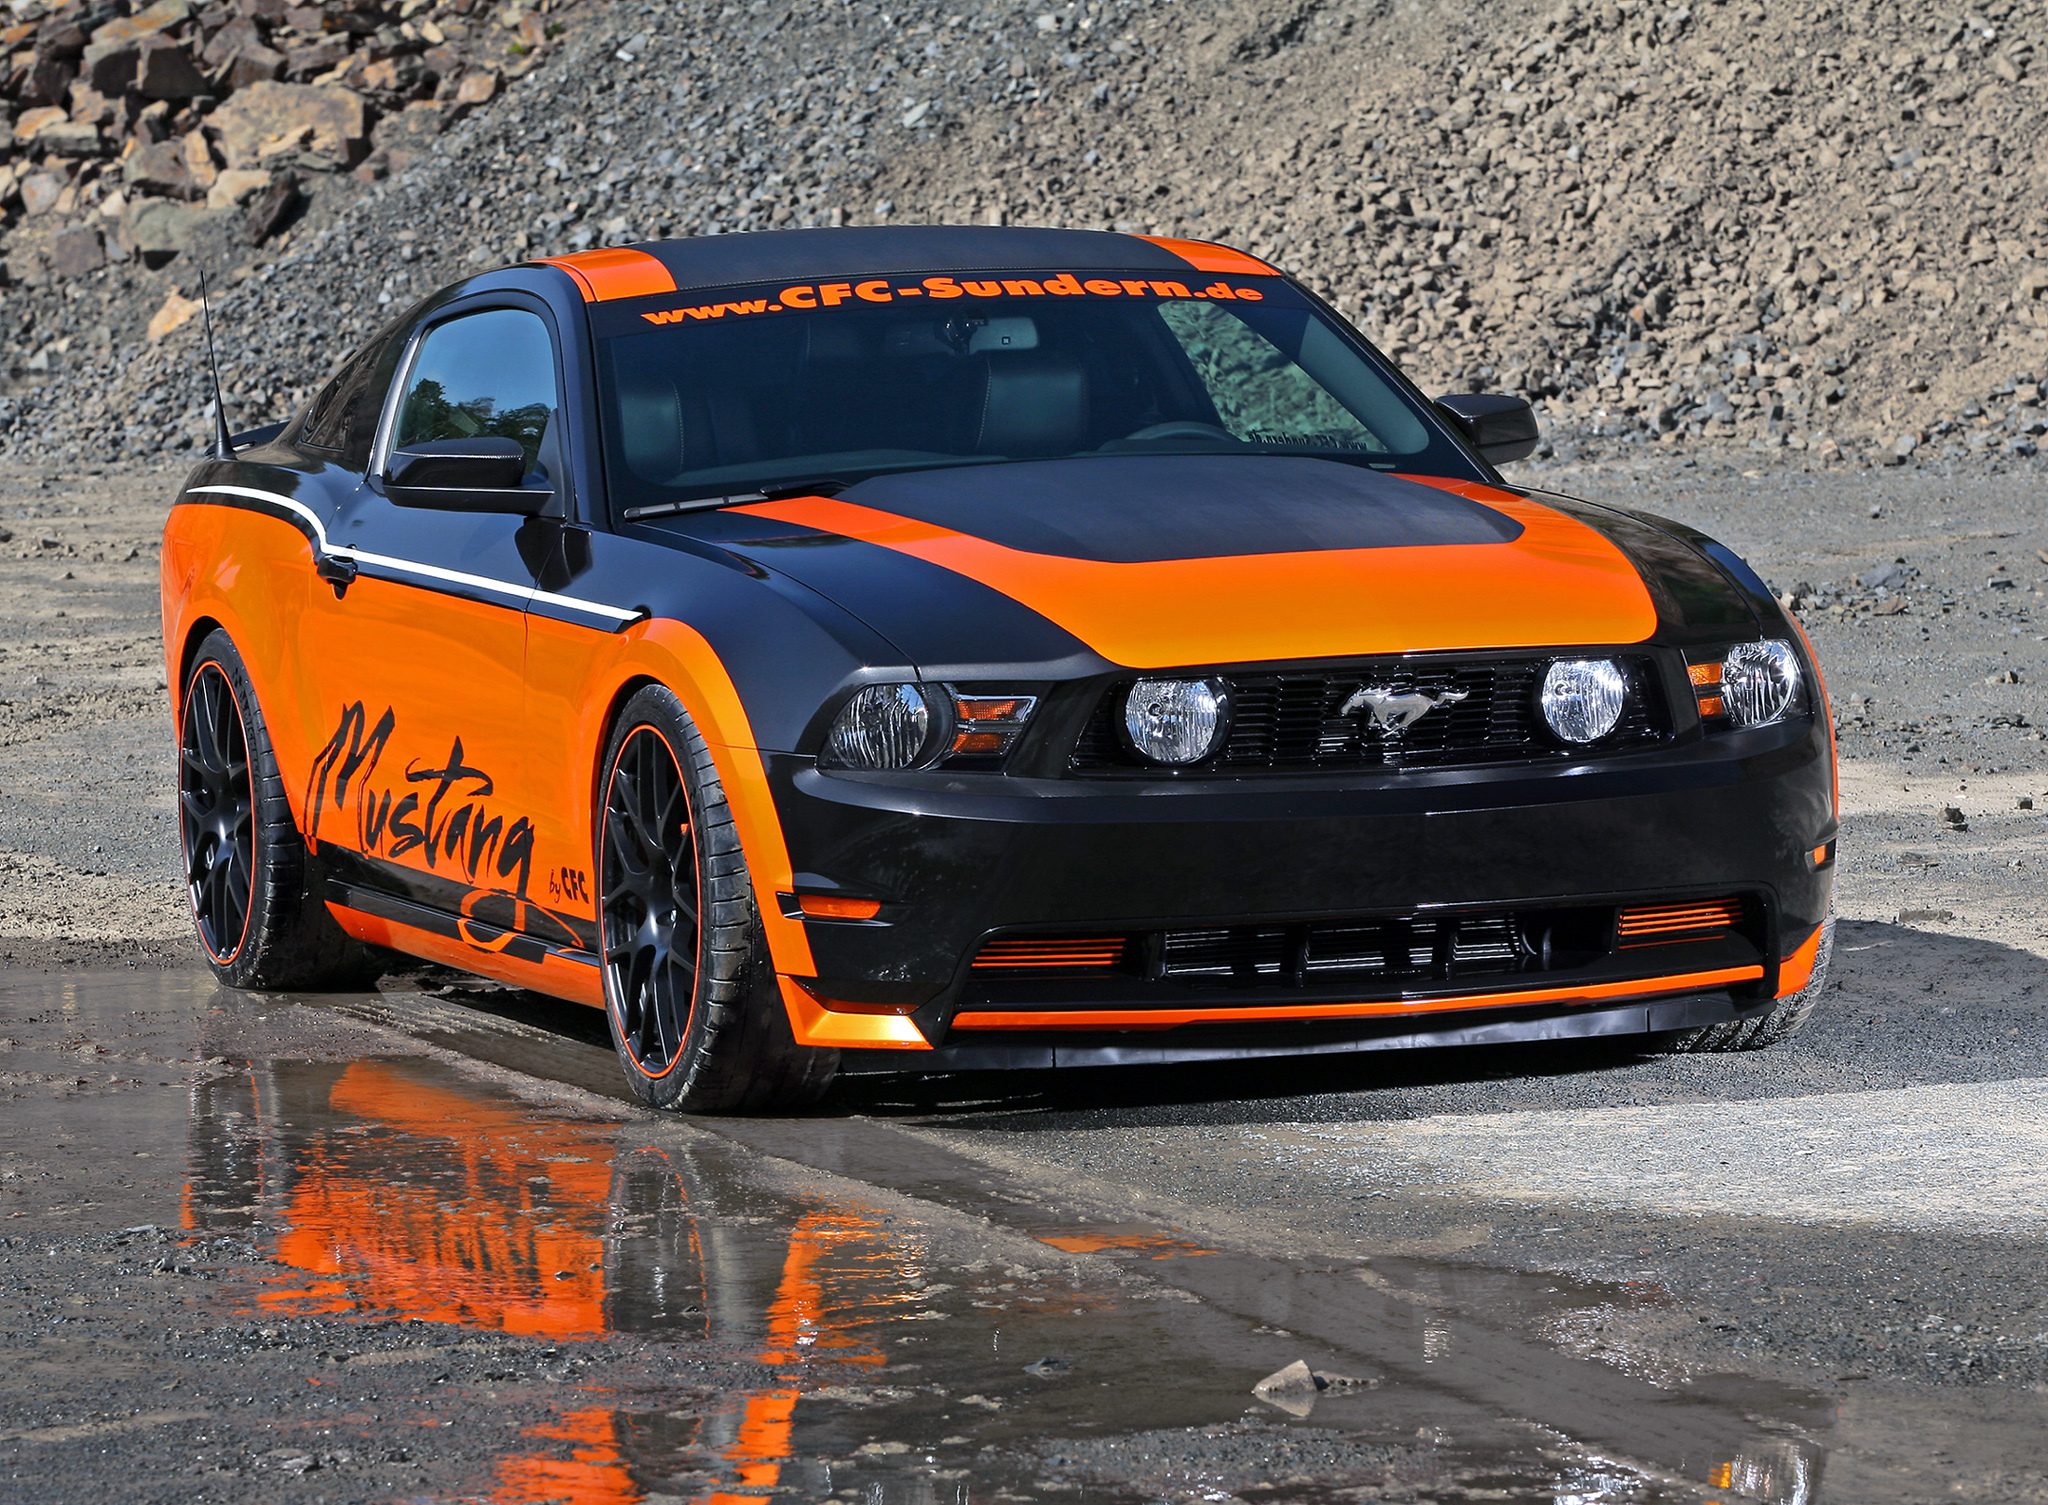 Mustang Of The Day: 2011 Ford Mustang GT By Design-World